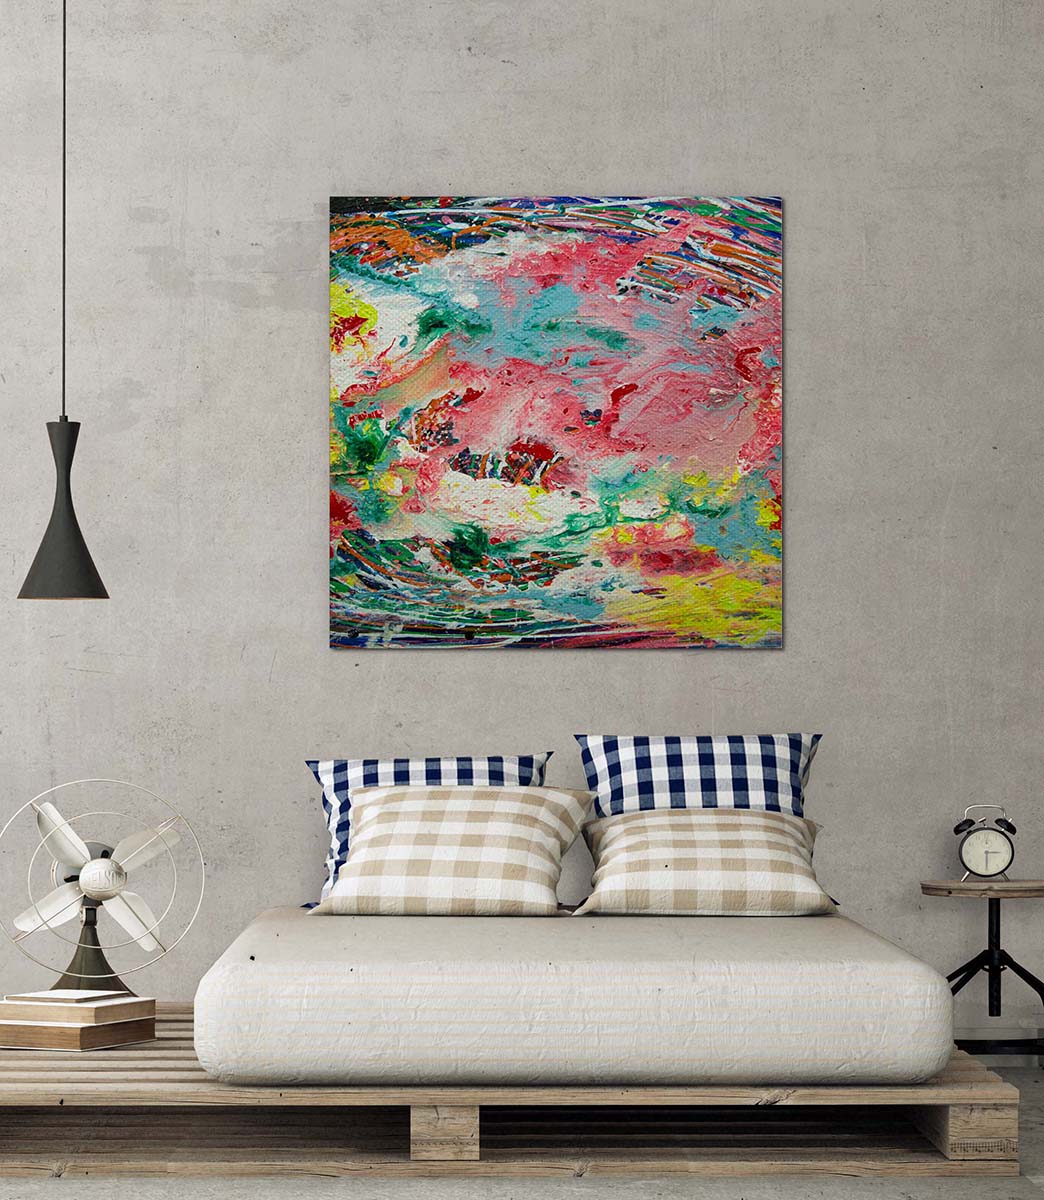 Abstract 21 Summerfeld Square artwork by Doug LaRue print on a bedroom wall